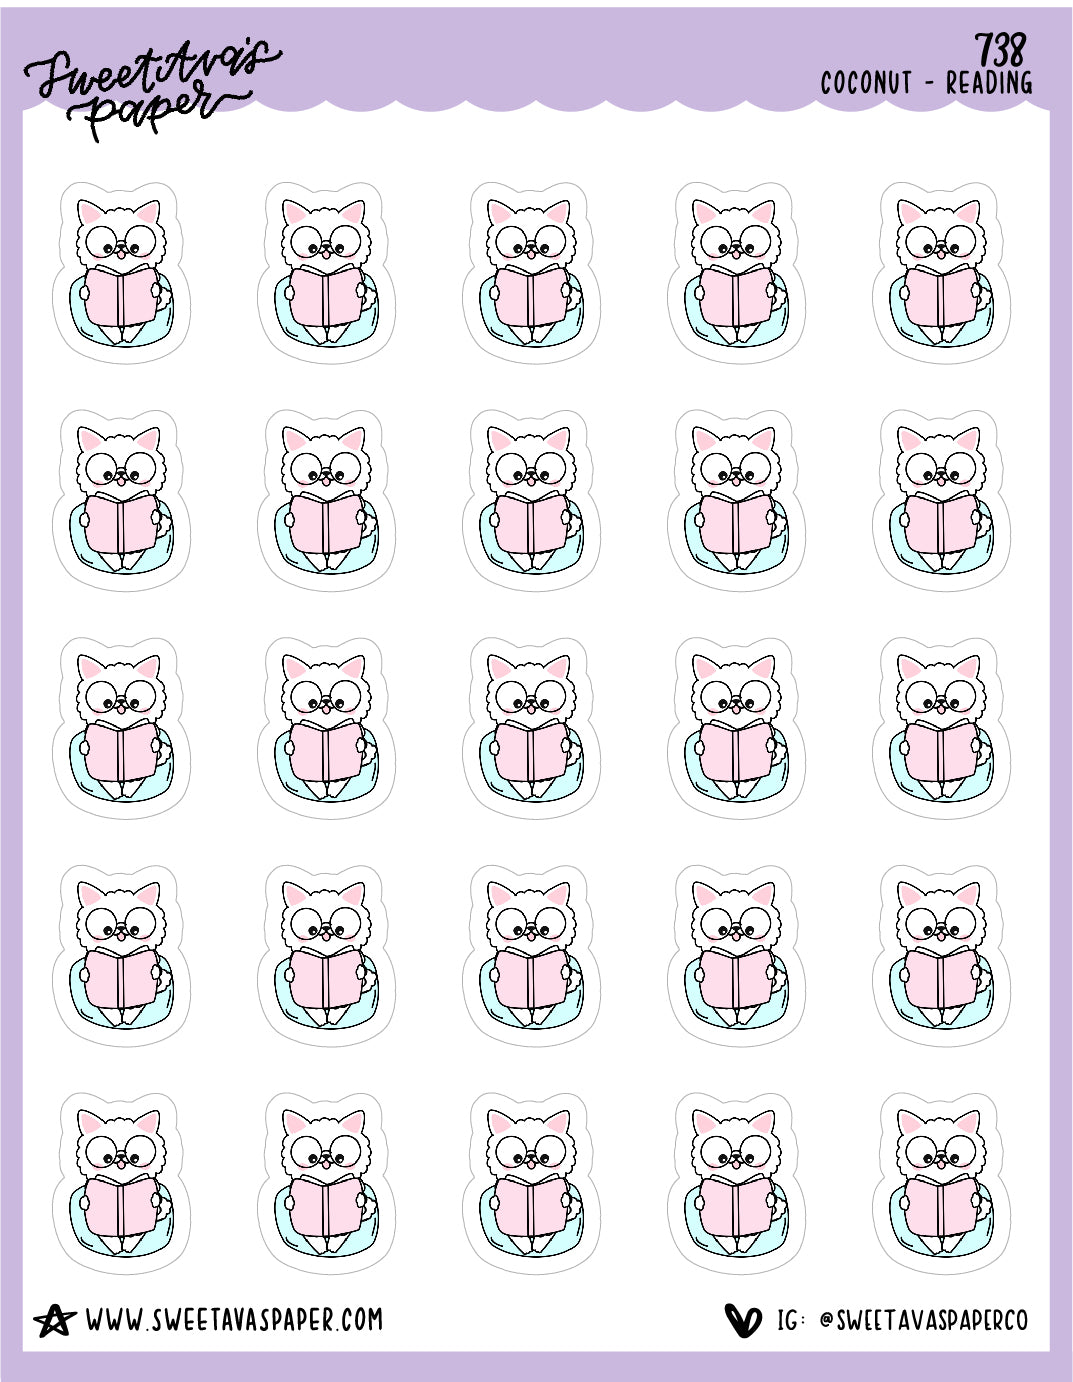 Reading Planner Stickers - Coconut the Puppy [738]